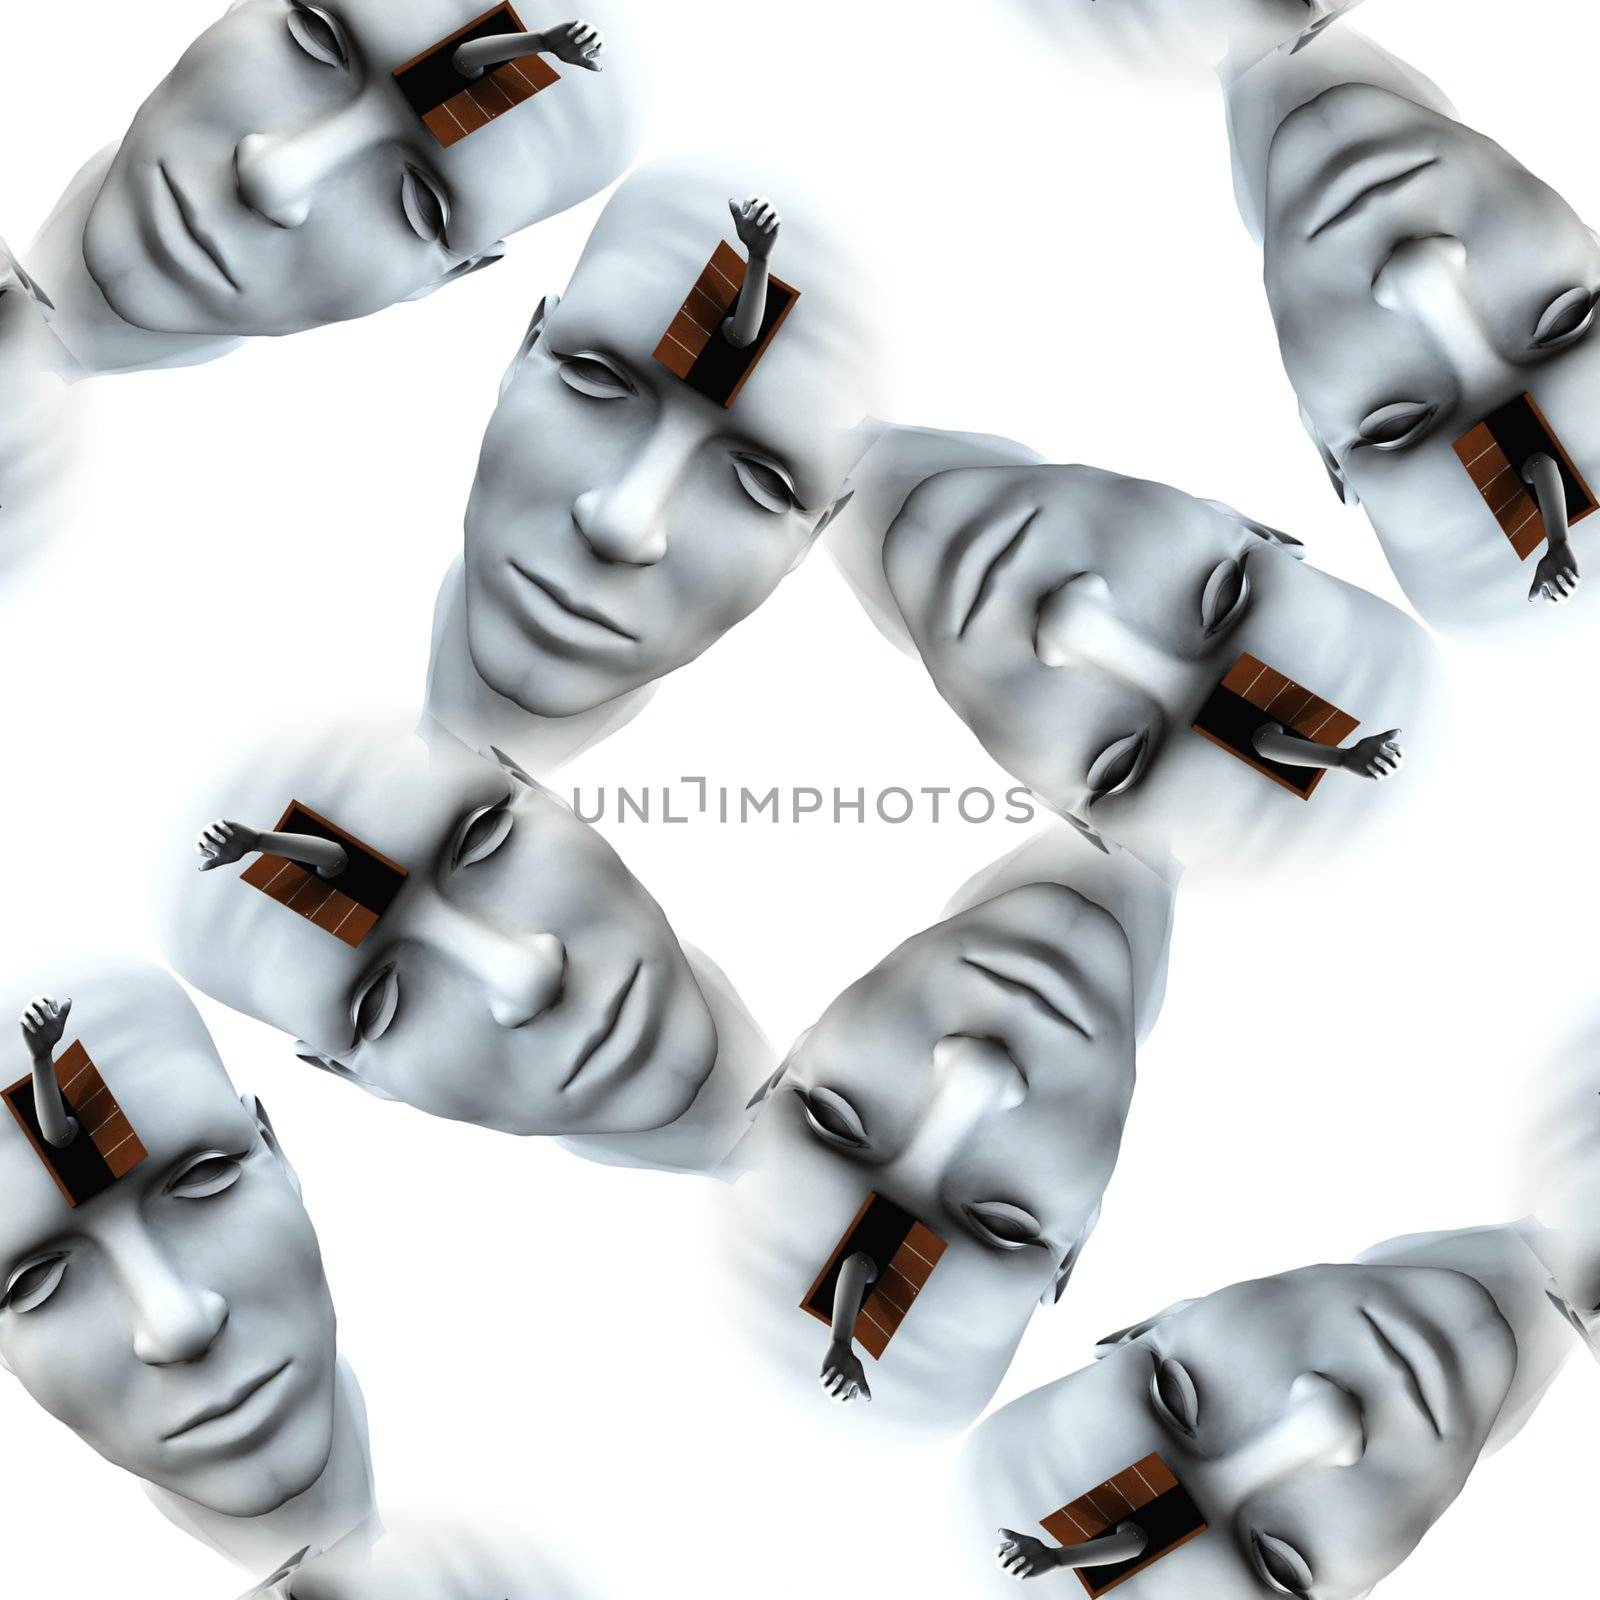 Concept image of a seamless tile pattern of a head with an open mind.